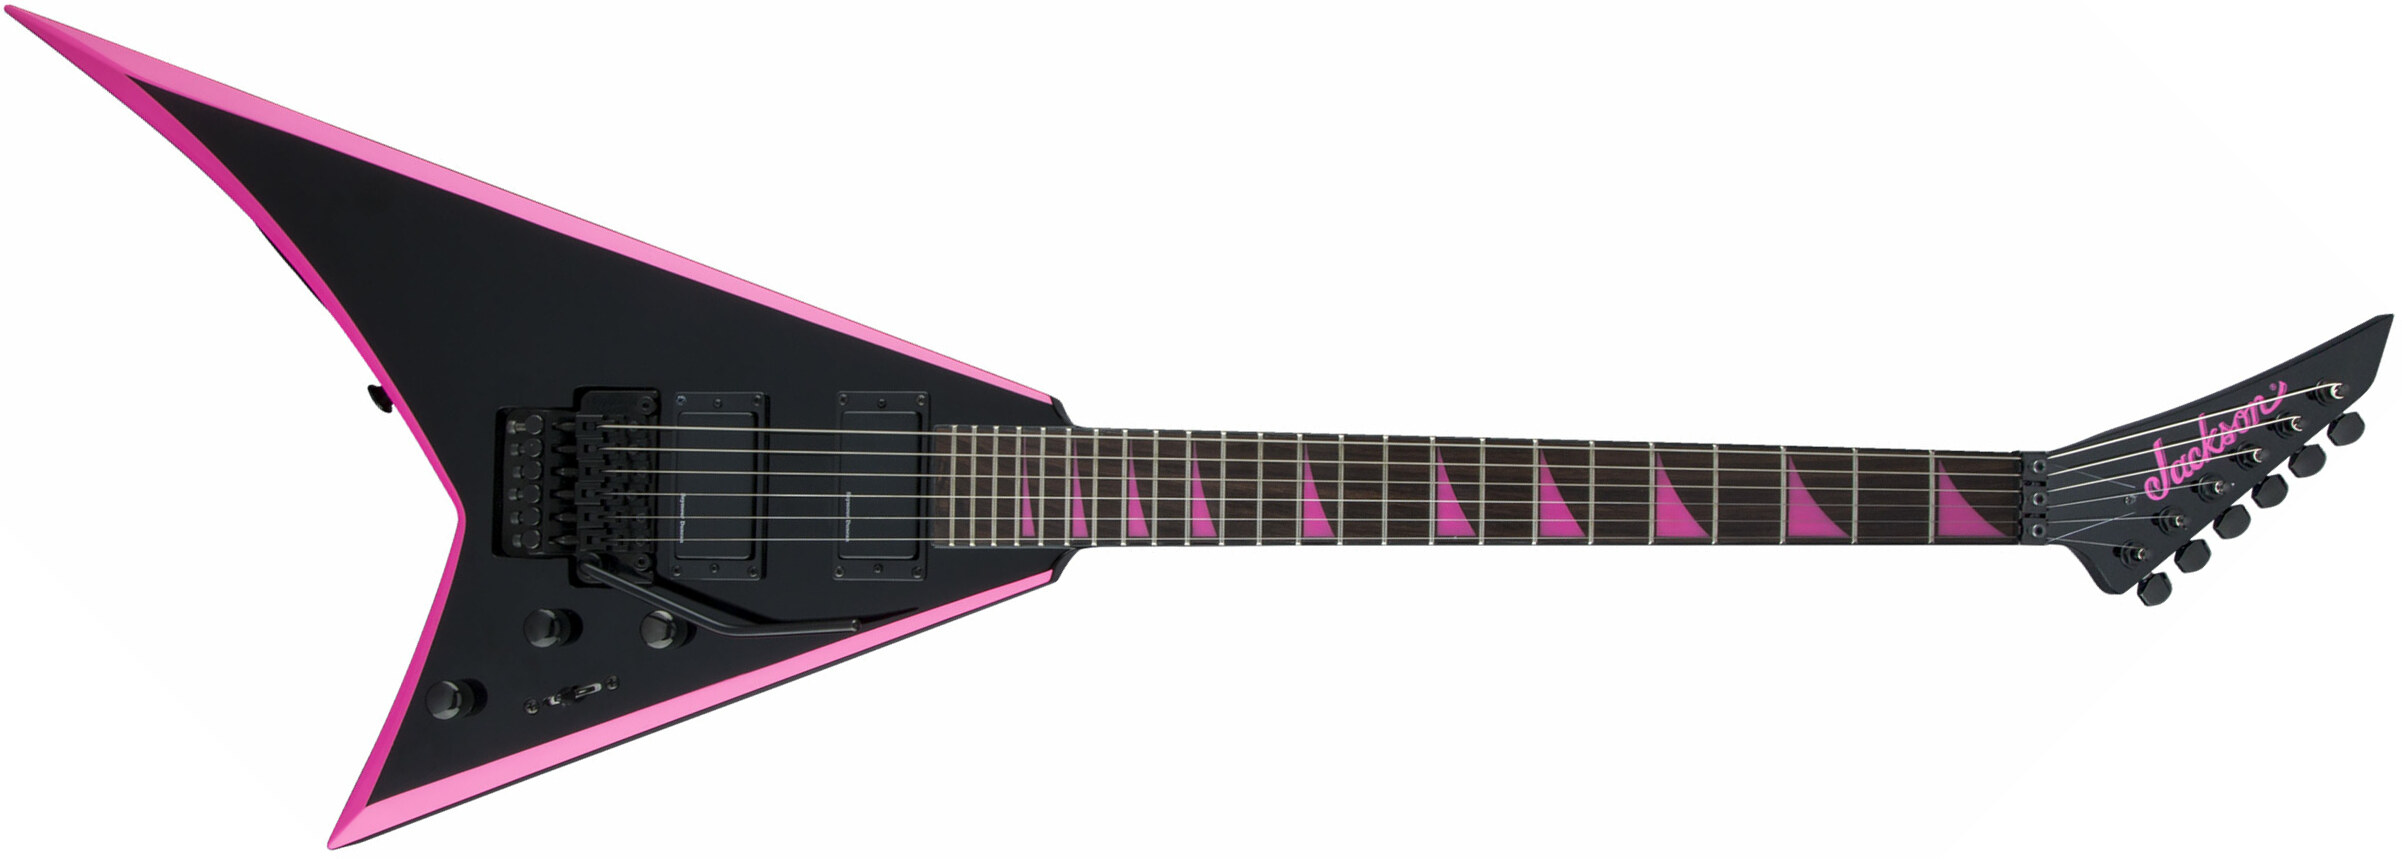 Jackson Rhoads Rrx24 Hh Seymour Duncan Fr Rw - Black With Pink Bevels - Metal electric guitar - Main picture